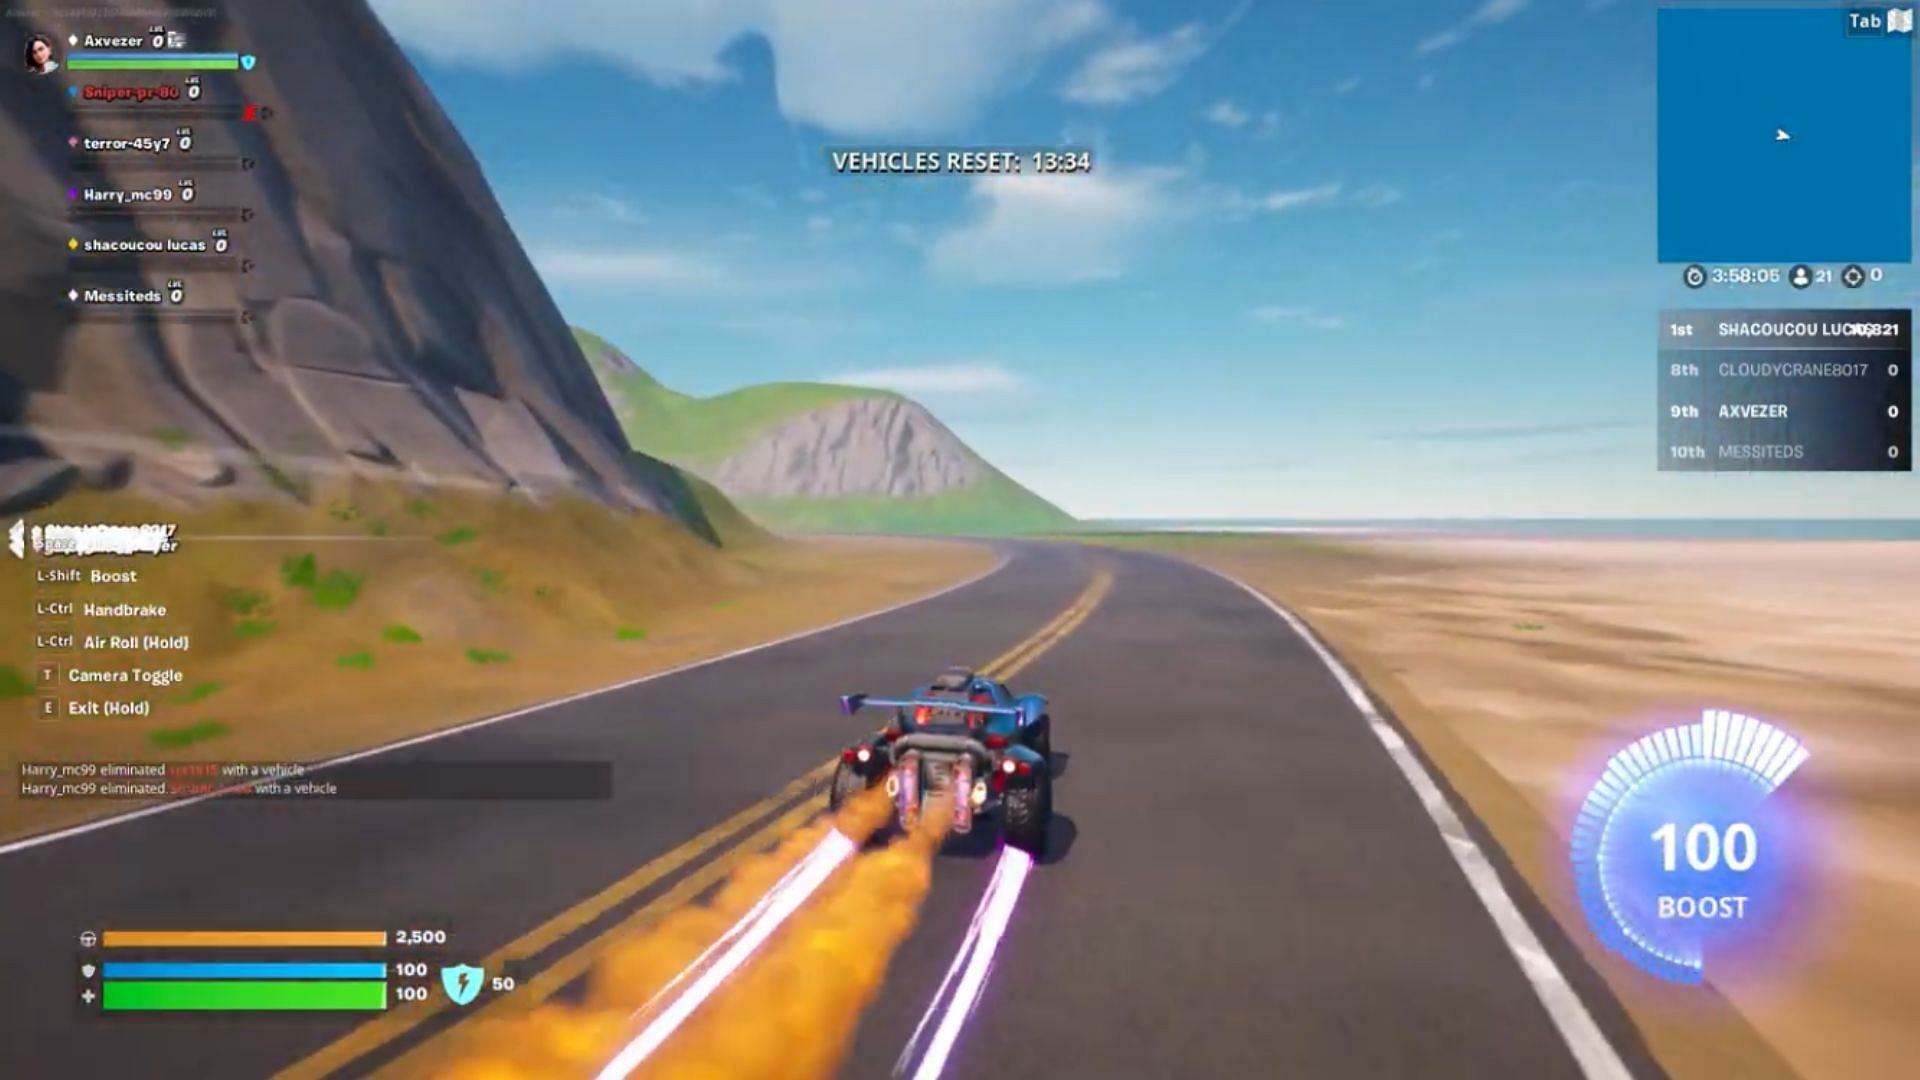 You can take a long drive around the map (Image via Axvezer Creative on YouTube)